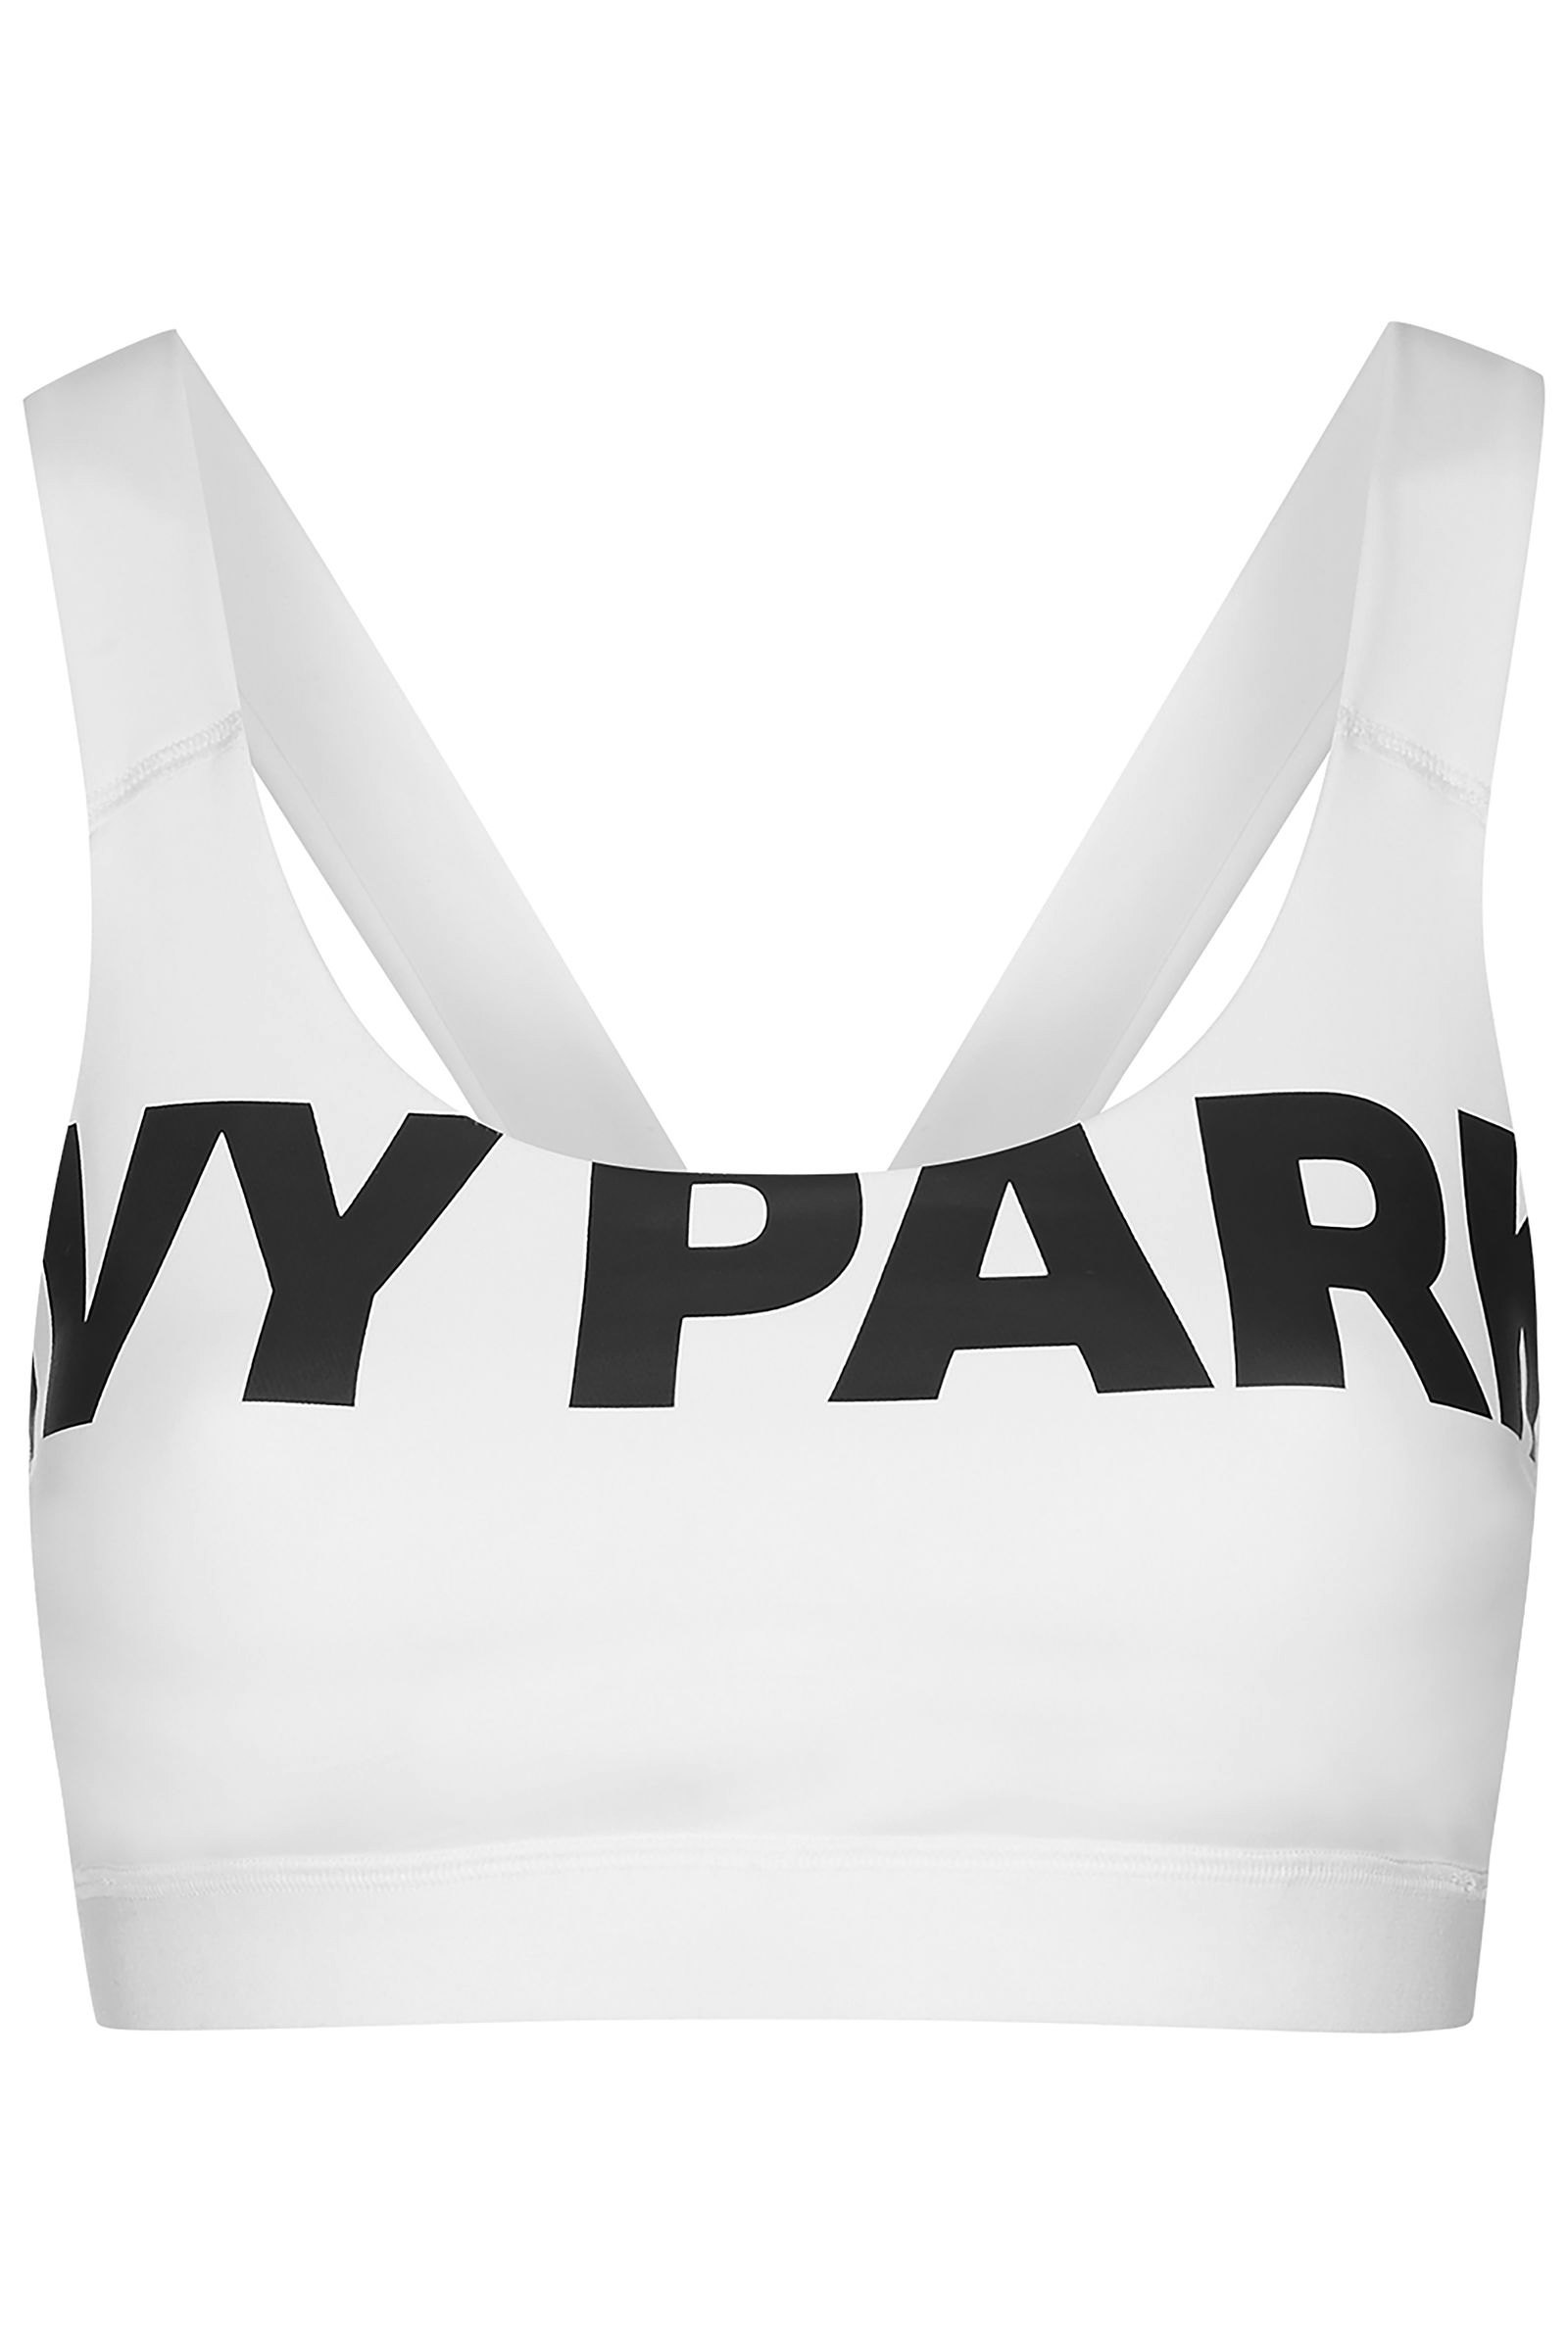 What Sizes Do The Beyonce Ivy Park Bras Come In? This Is The Exact Range —  PHOTOS